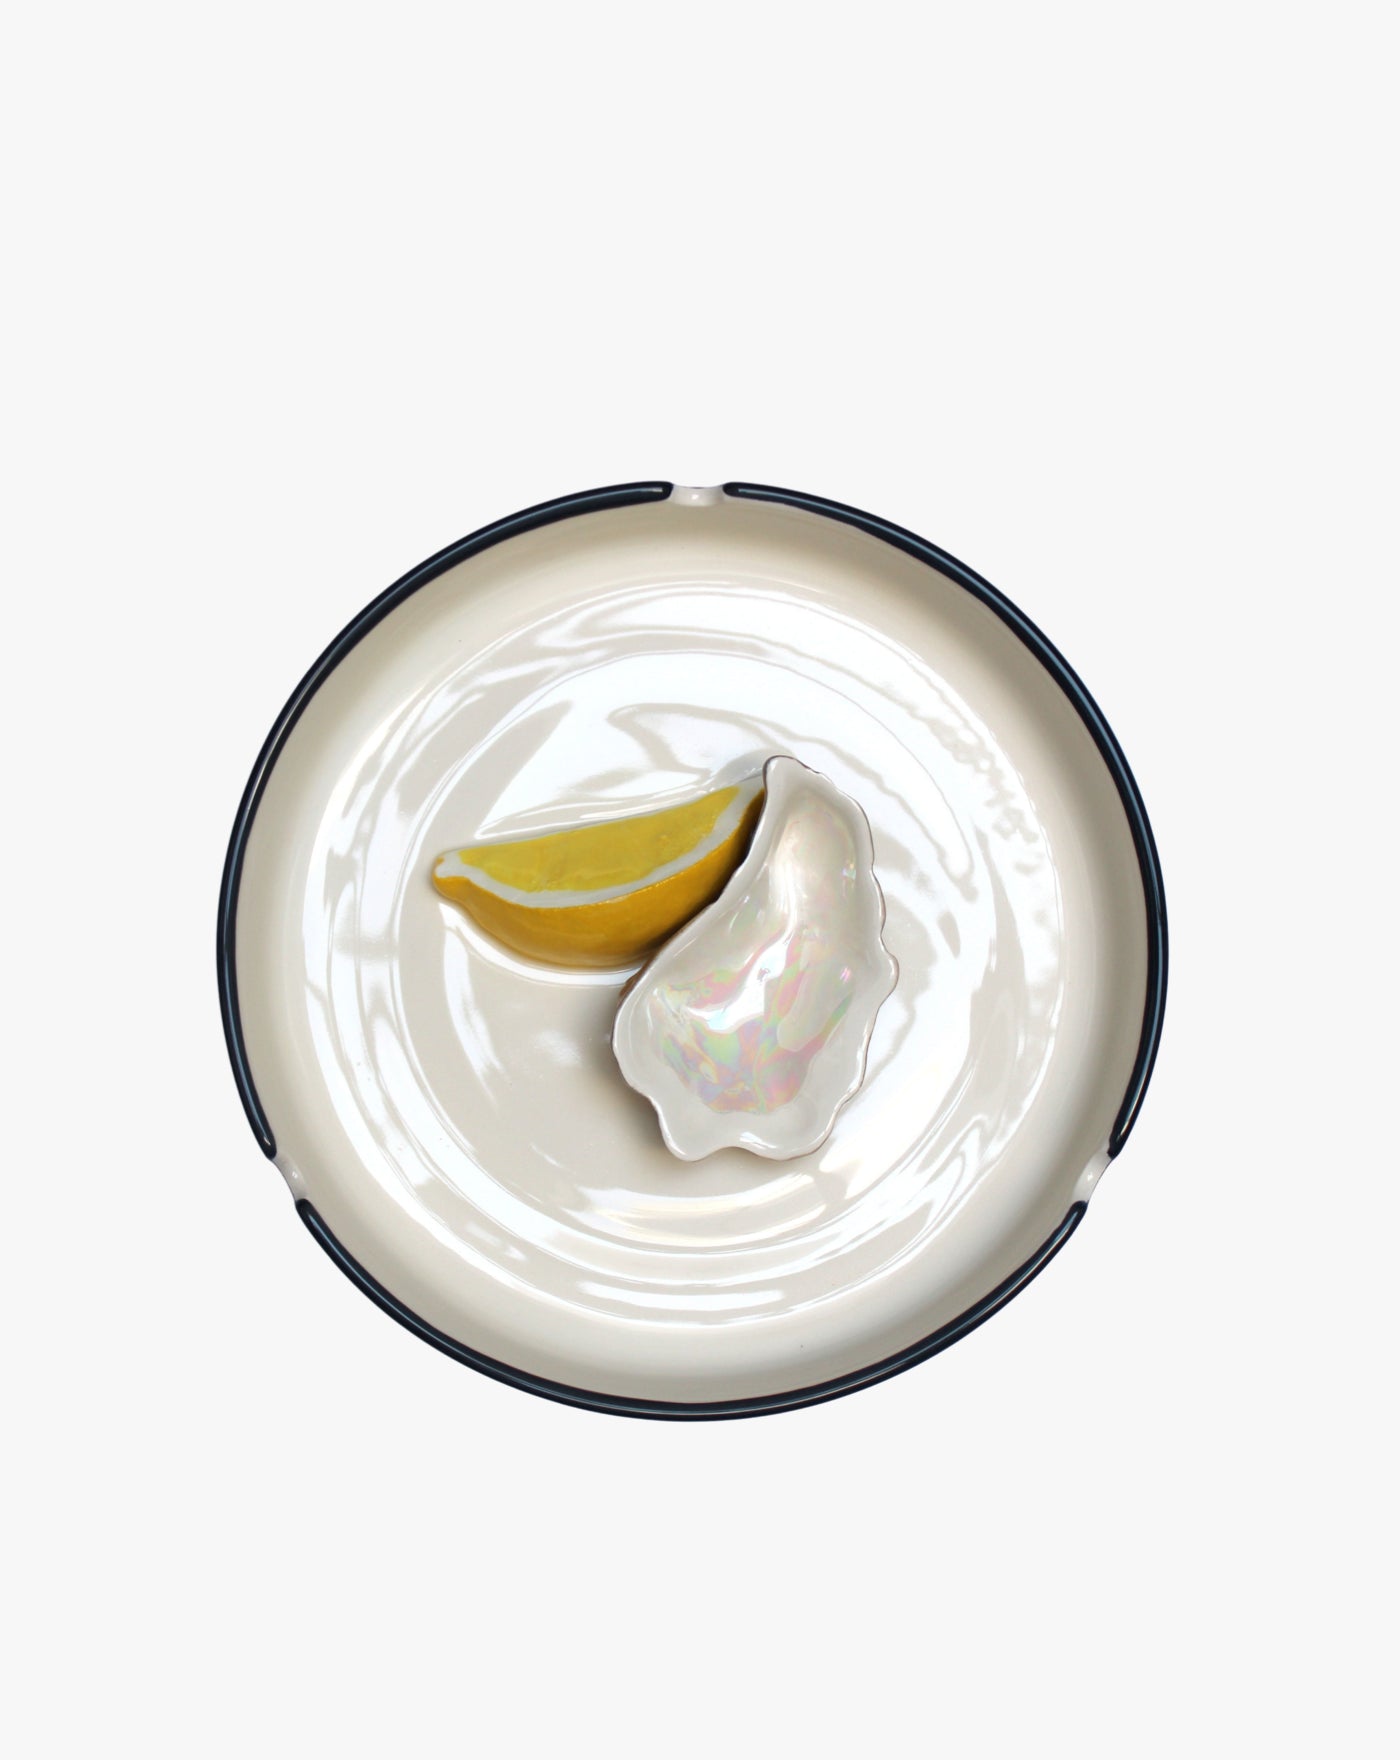 A simple white glazed earthenware Plaisir Solitaire Ashtray with a black rim, displaying a single fresh oyster accompanied by two lemon wedges on a plain background. Brand: Villa Arev.